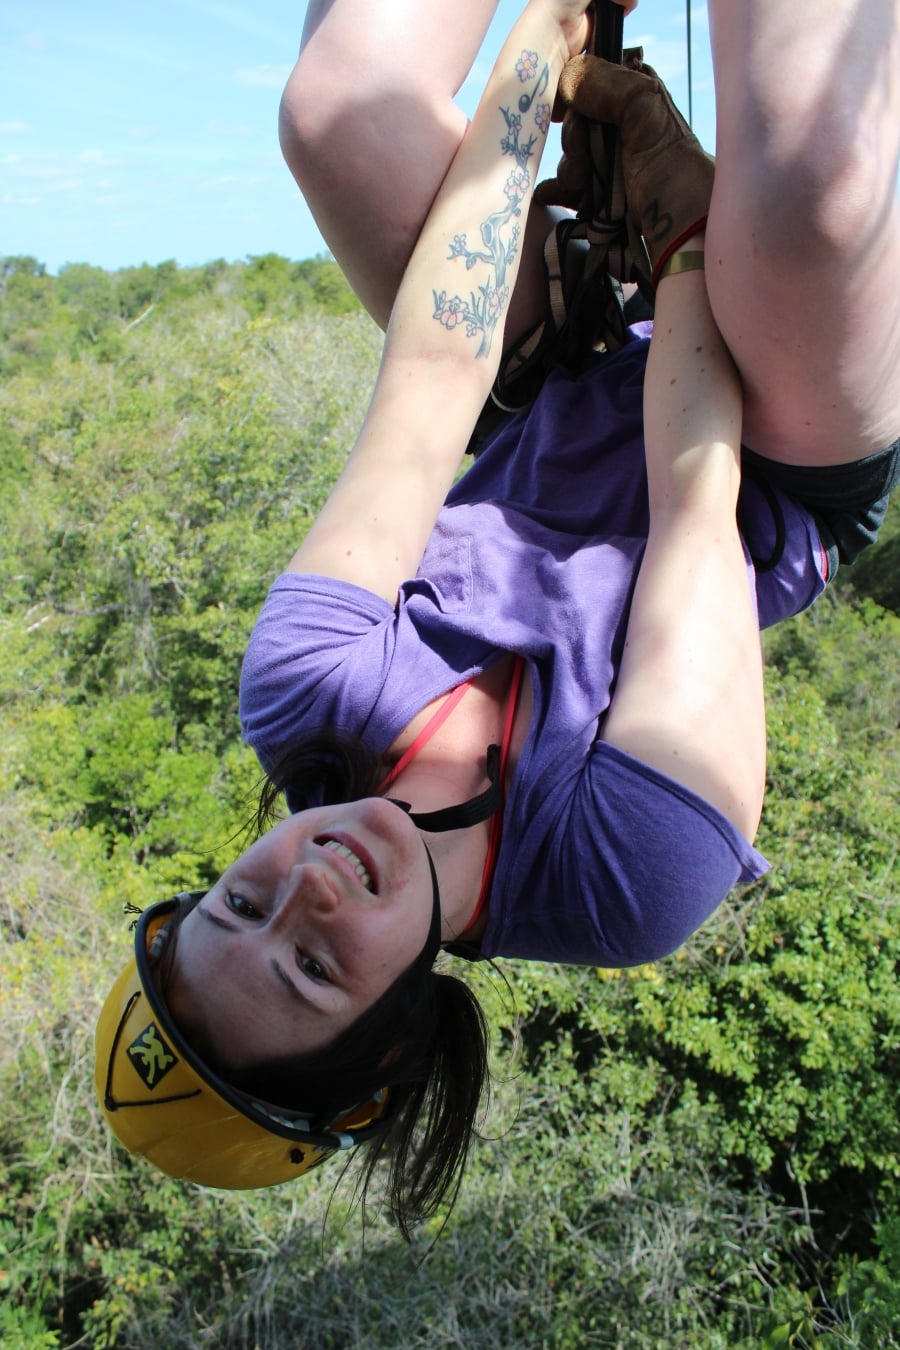 A woman zip lining upside down over trees.